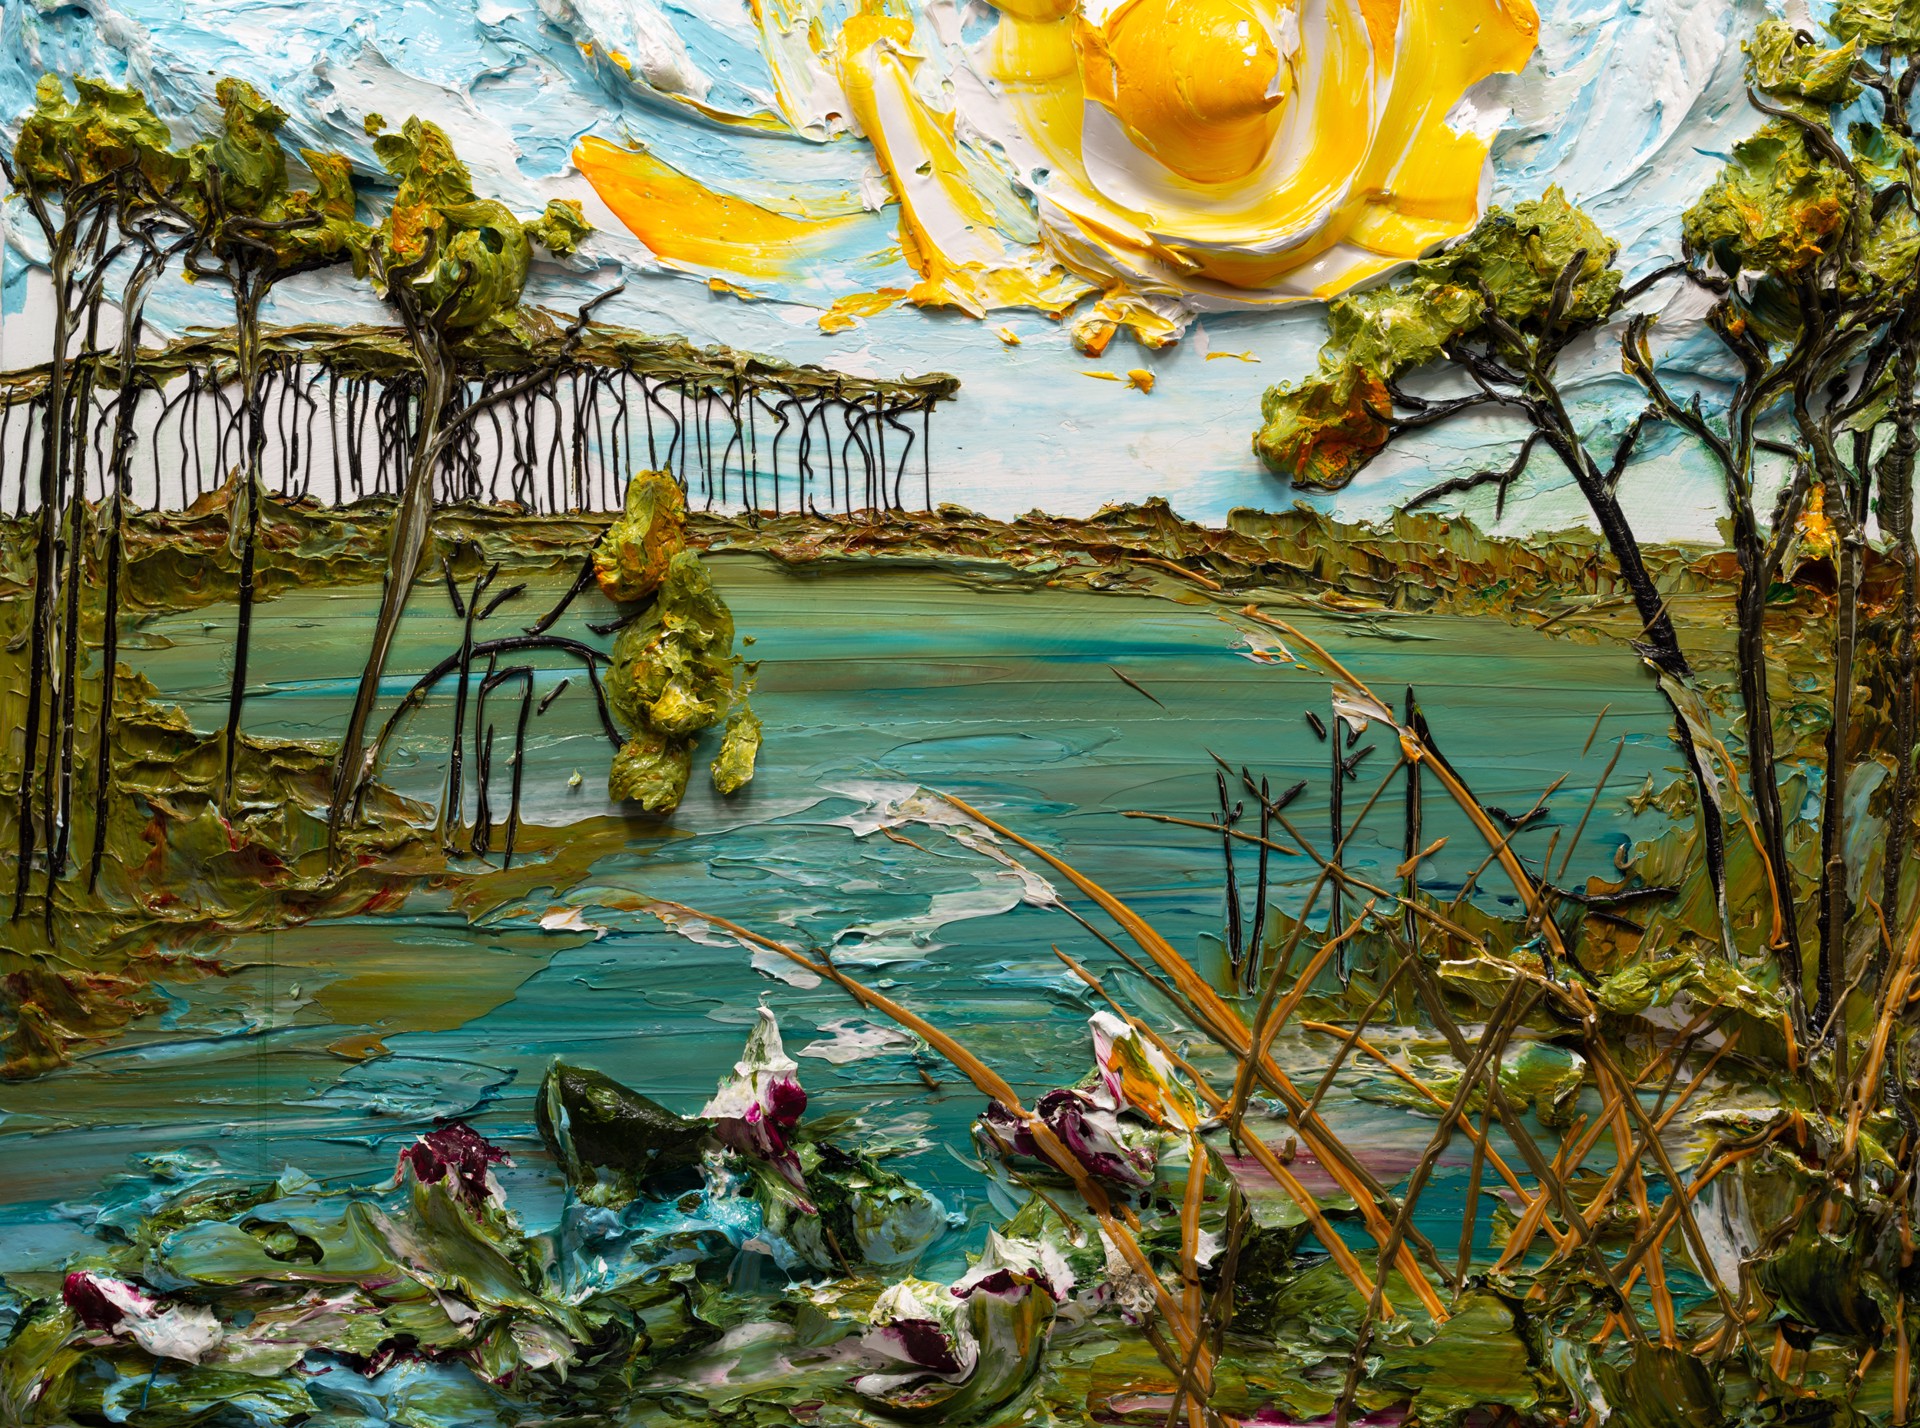 LAKESCAPE-LS-40X30-2019-158 by JUSTIN GAFFREY